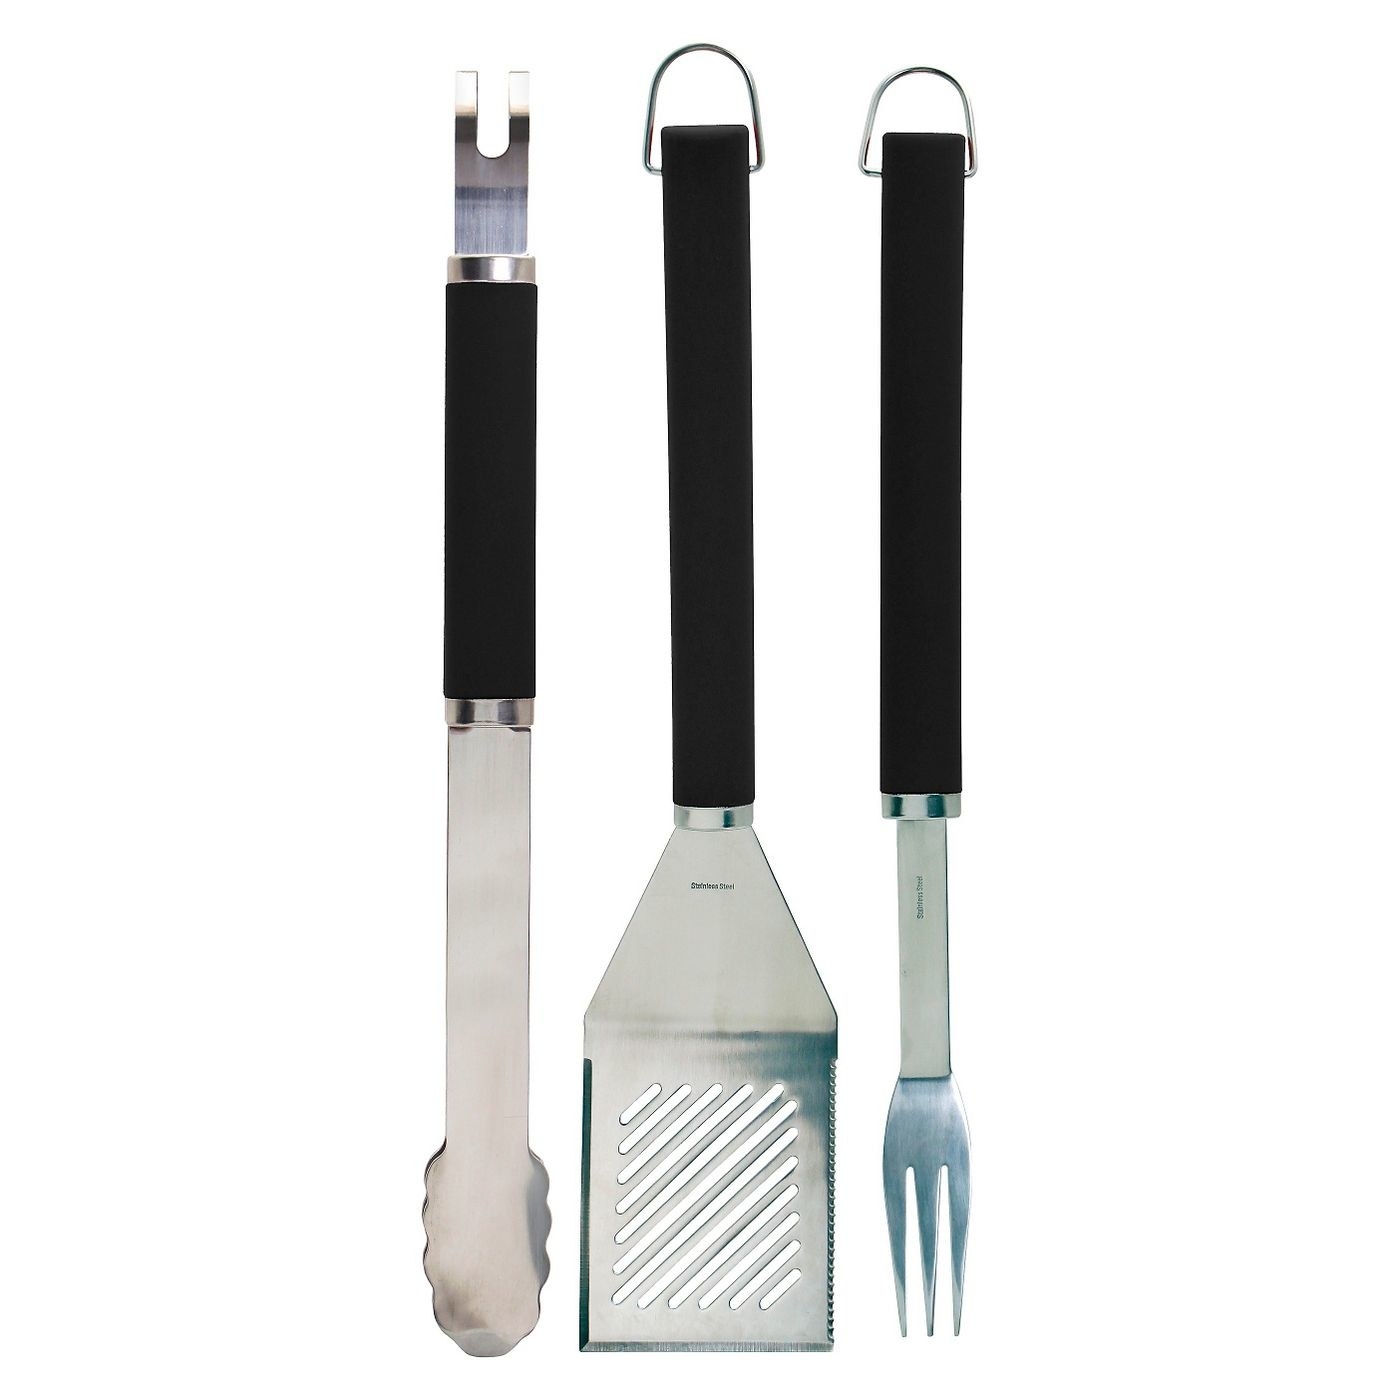 The three-piece stainless steel grill set